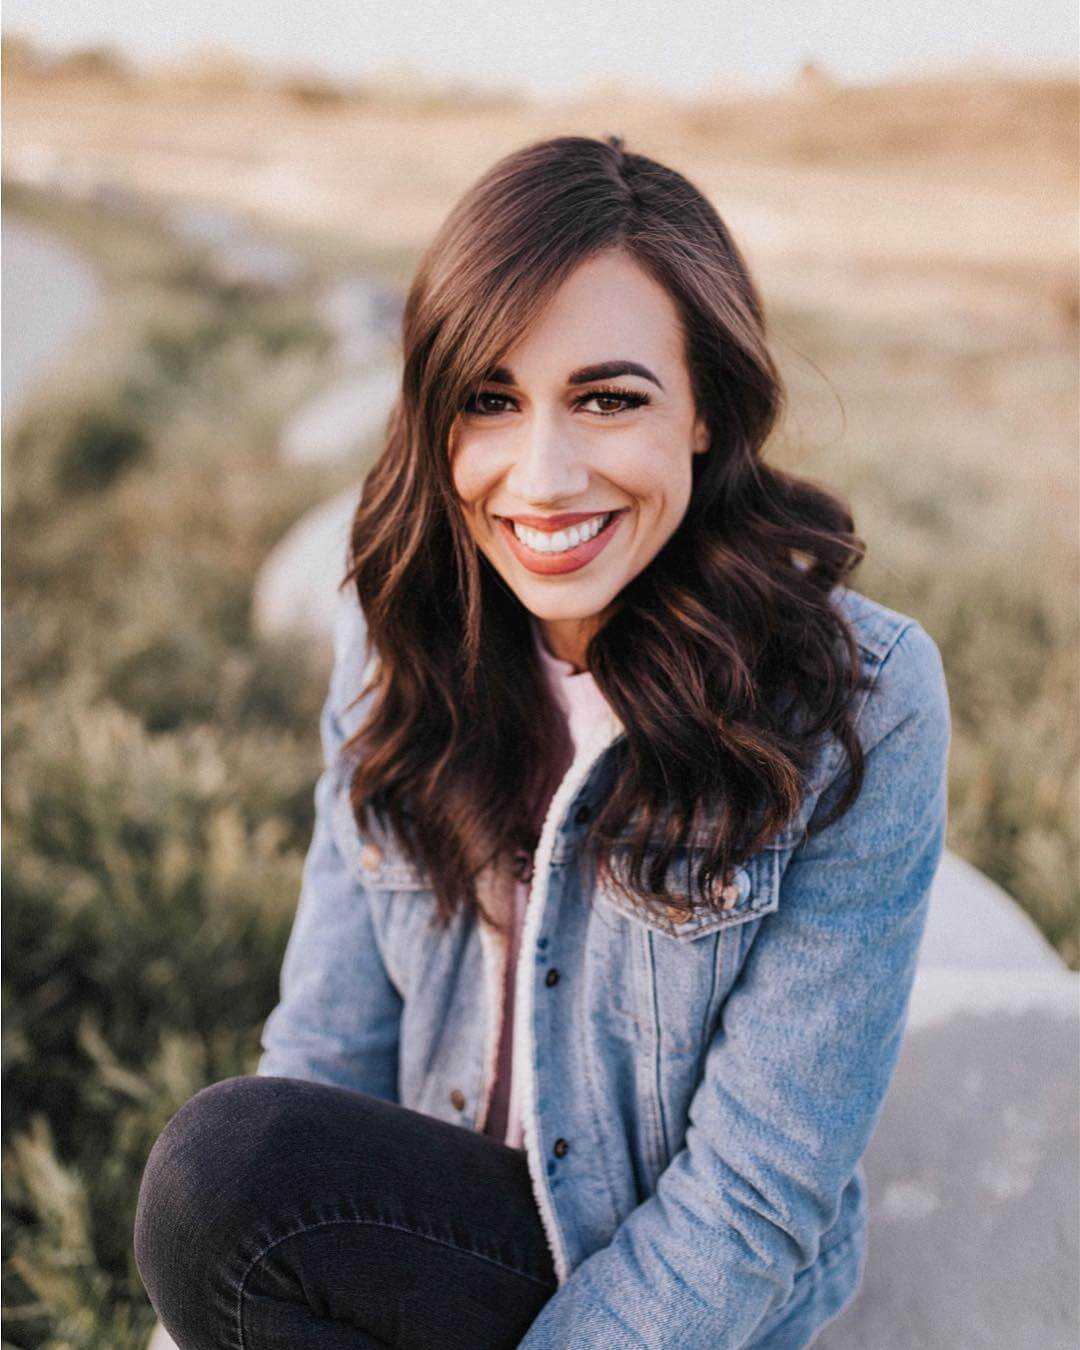 51 Hottest Colleen Ballinger Big Butt Pictures That Will Make You Begin To Look All Starry Eyed At Her 290